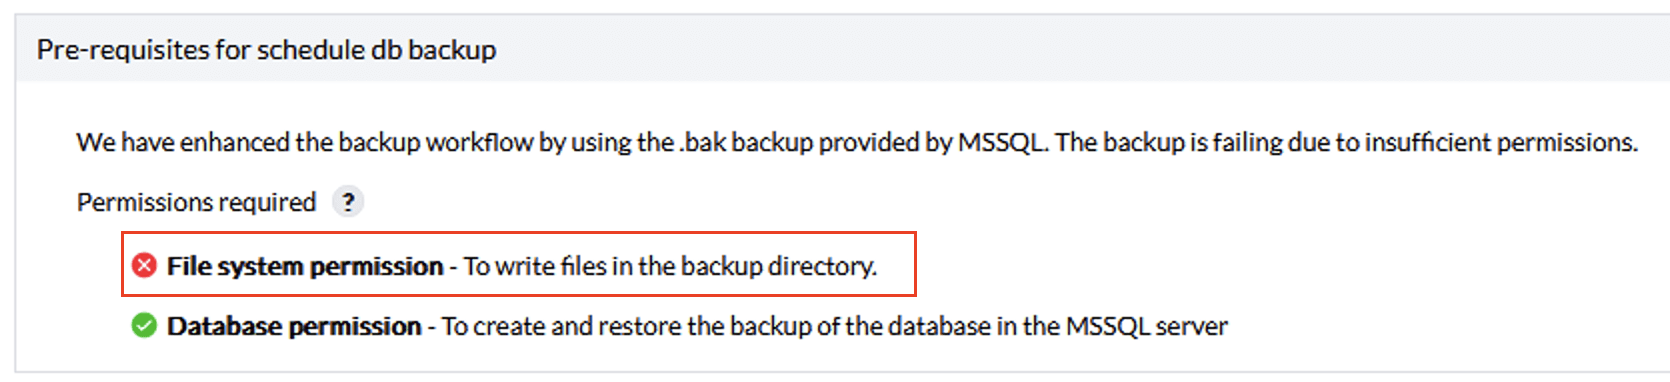 File System permisión - To write files in the backup directory